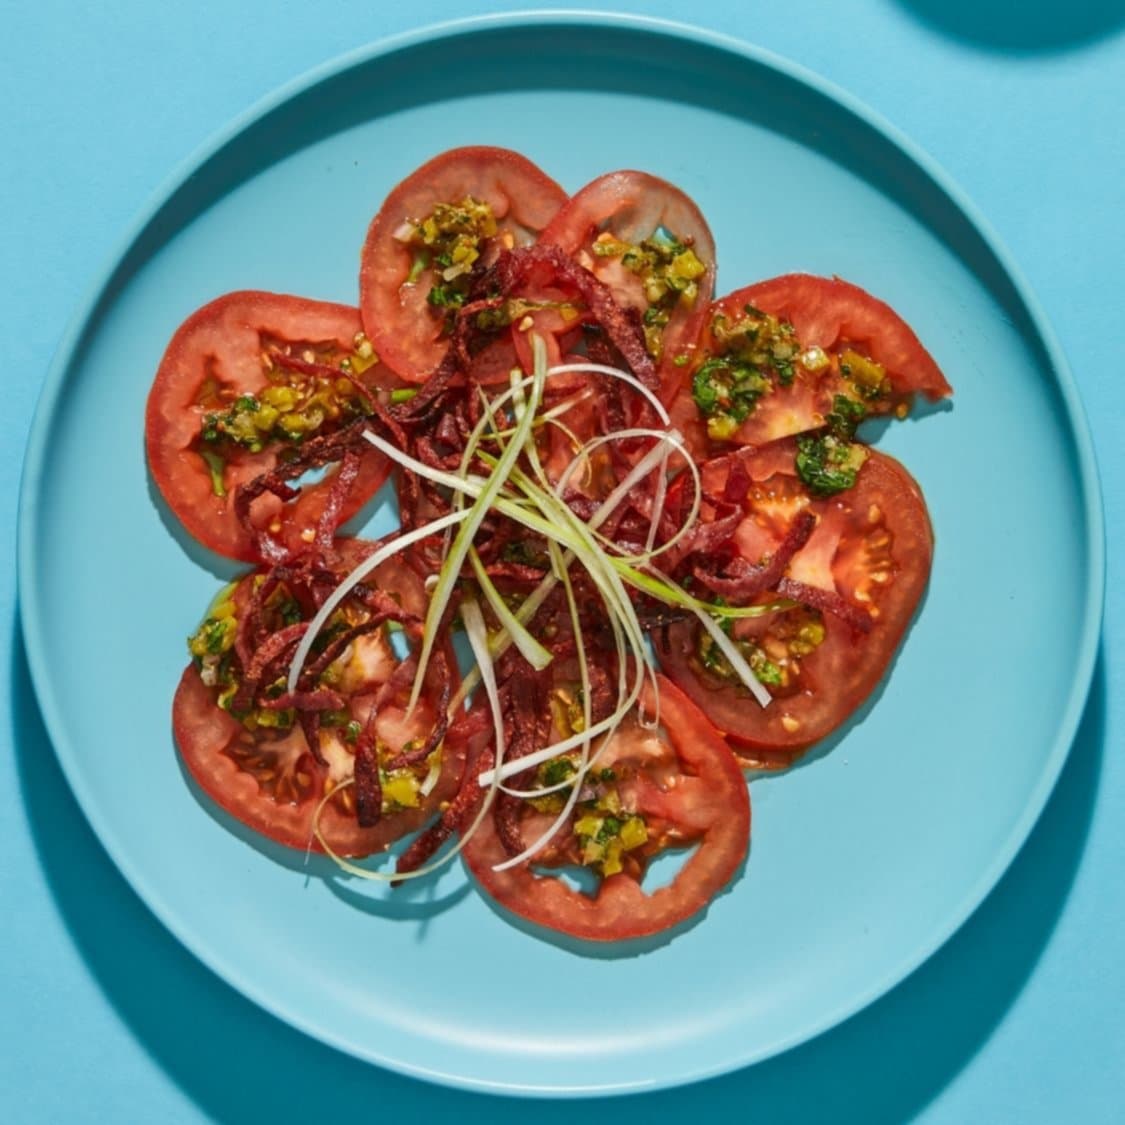 https://fleishigs.com/images/mobile-app/recipes/1807-list-tomato-carpaccio-with-persillade-and-frizzled-salami.jpg